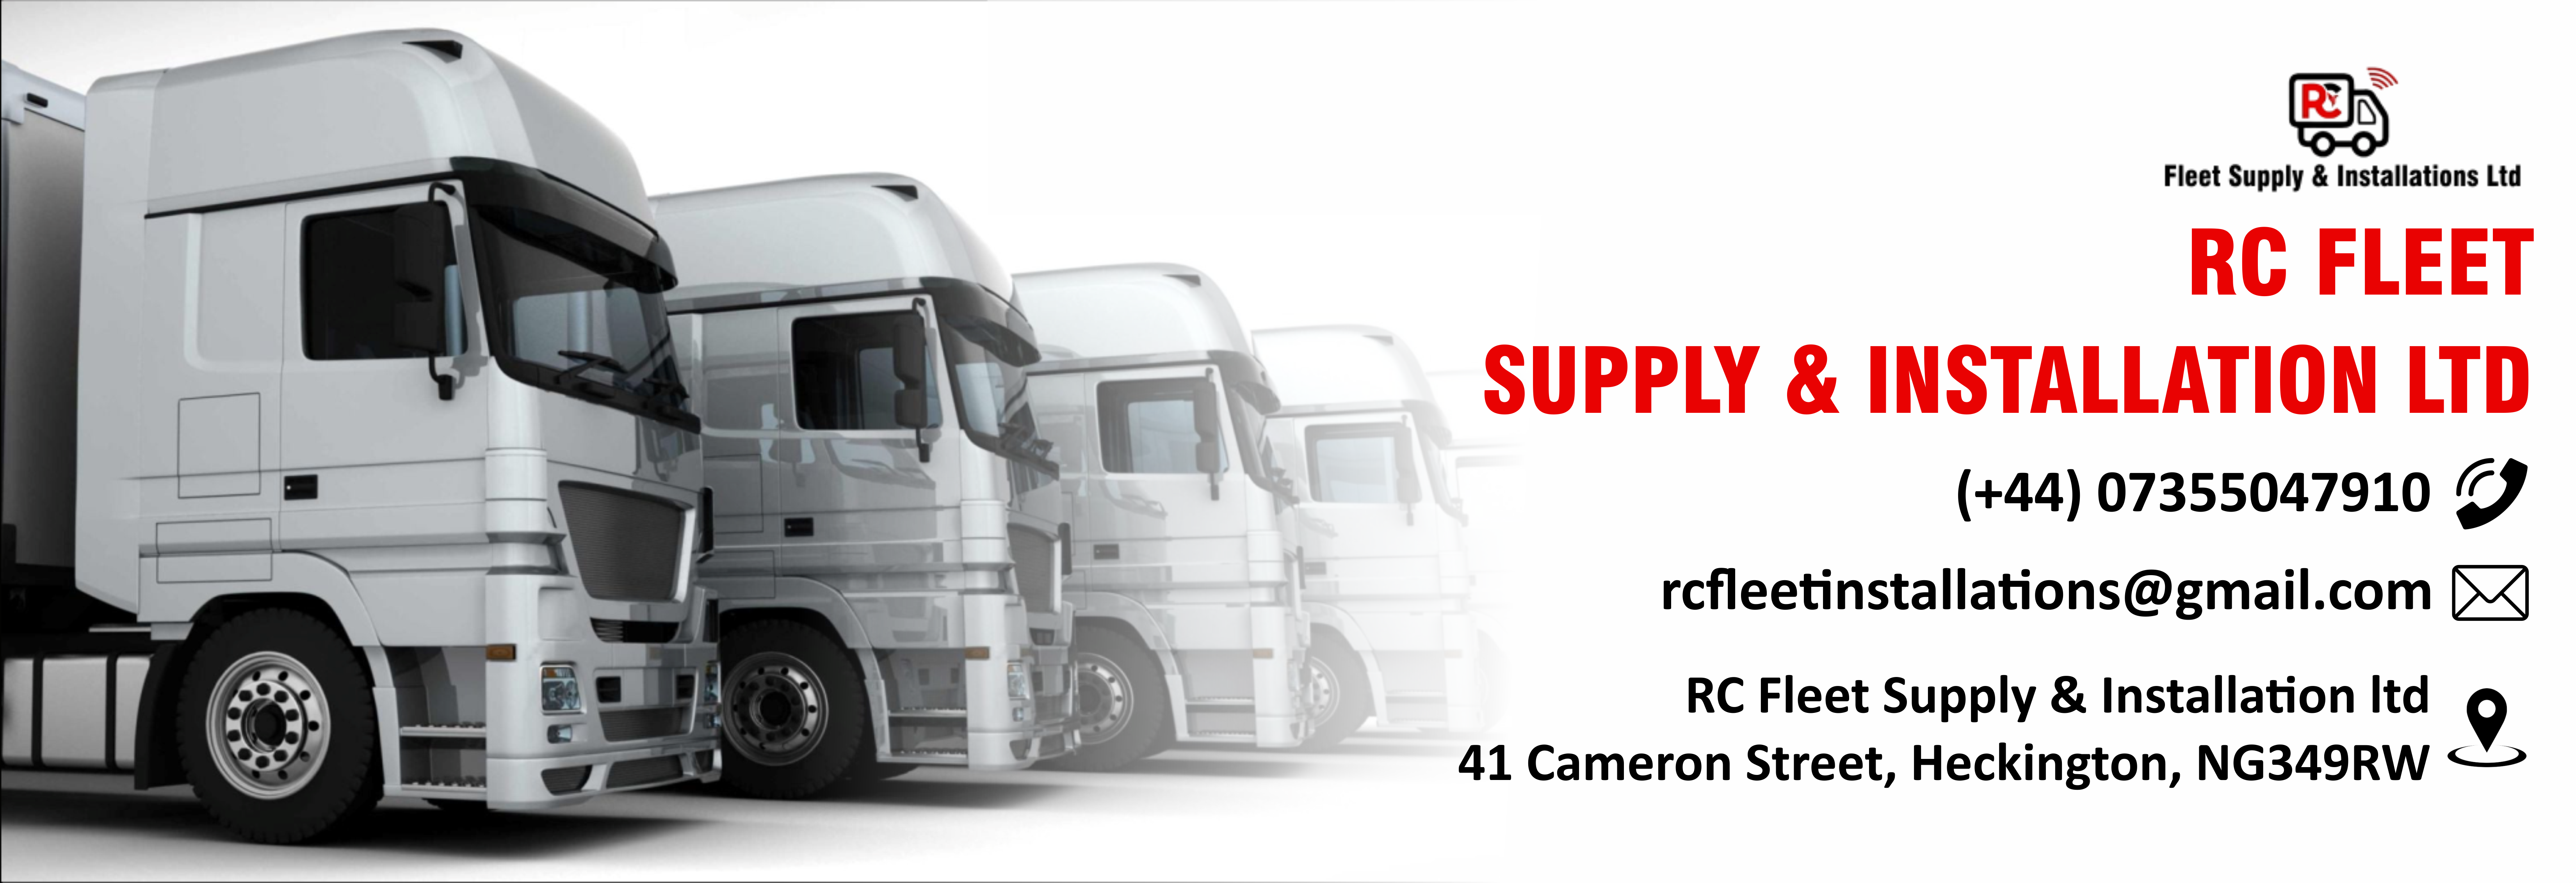 RC Fleet Supply and Installation LTD Cover Image